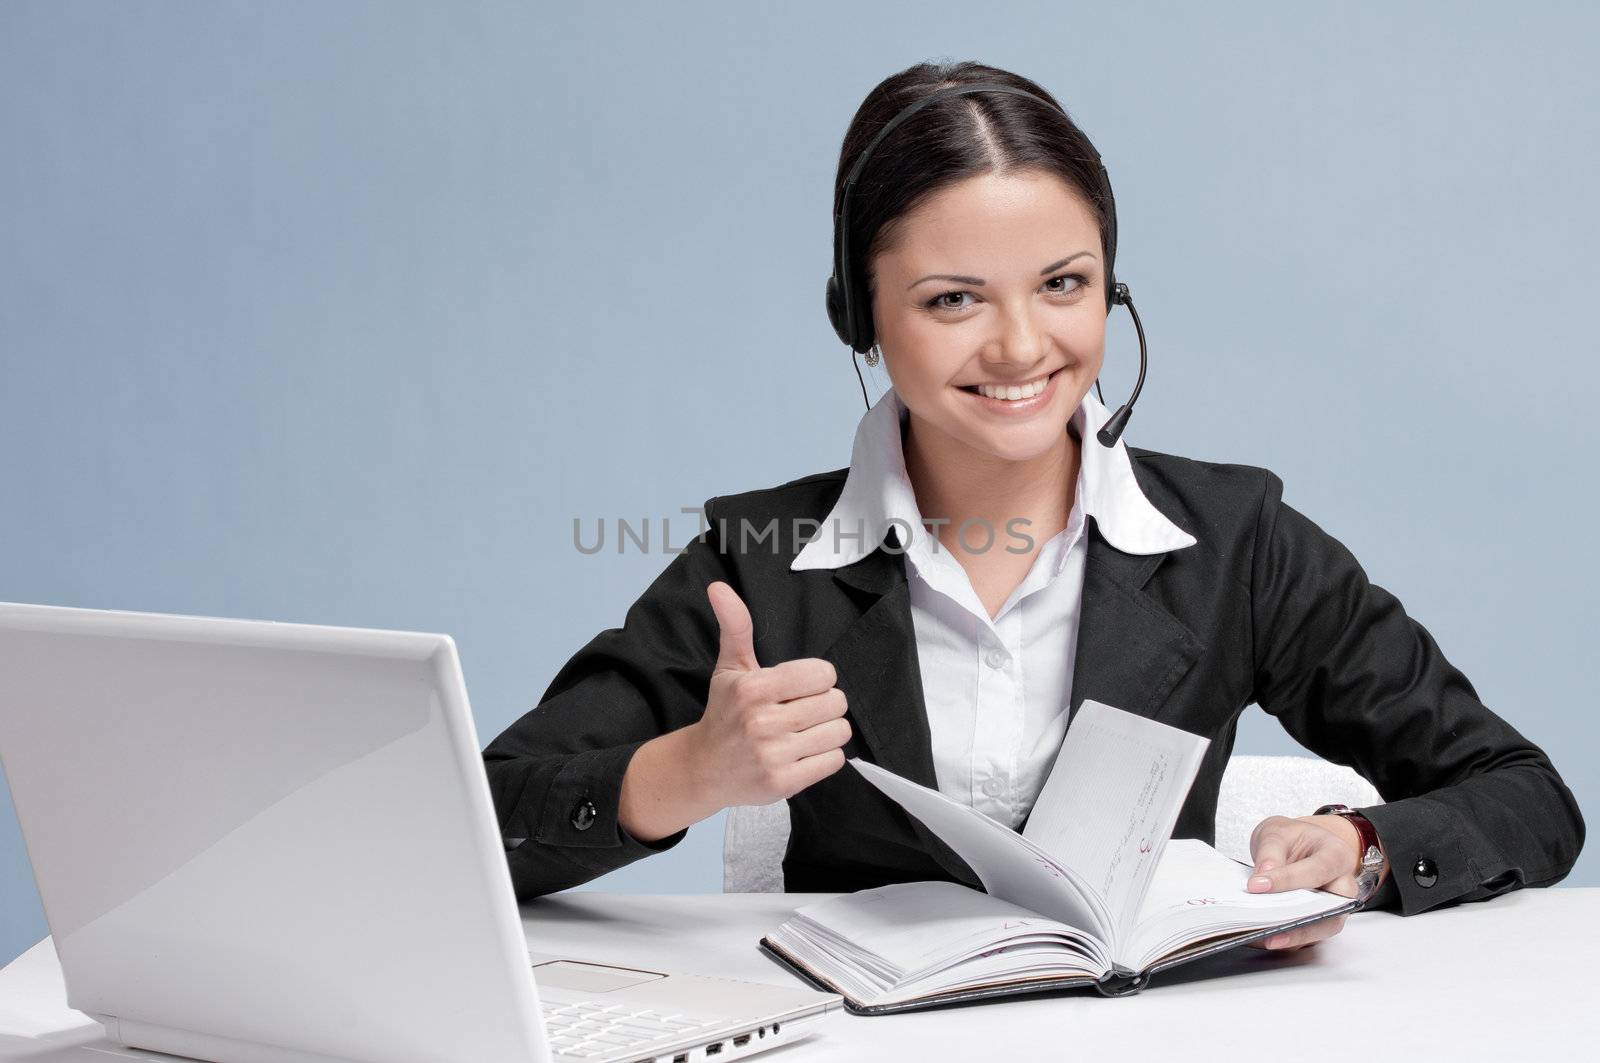 Business woman with headset communication by markin